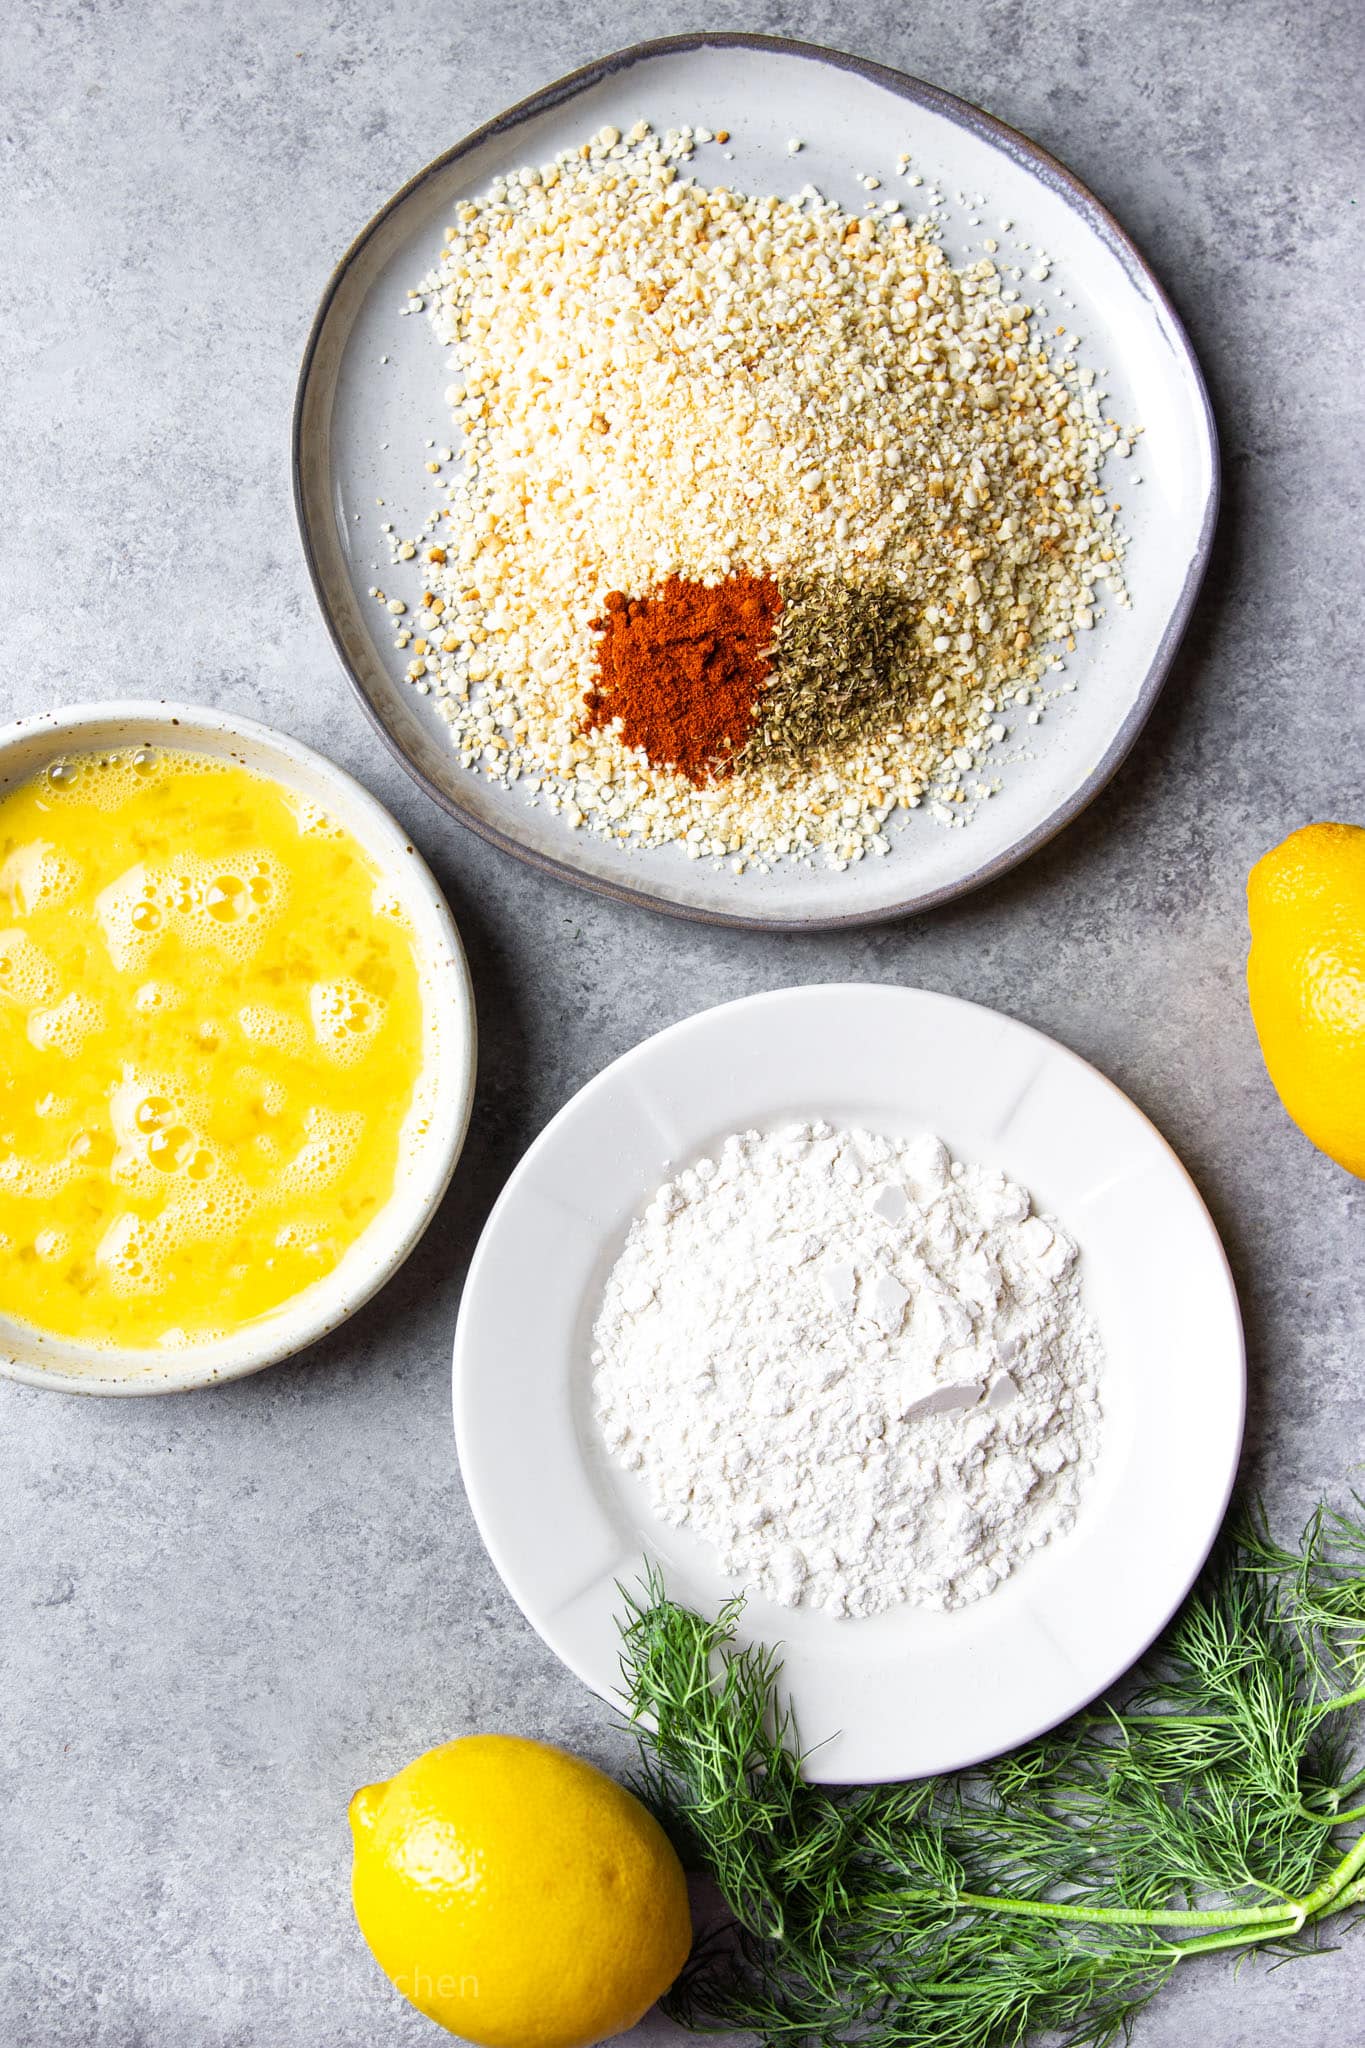 flour, breadcrumbs, and beaten eggs in 3 different white bowls.